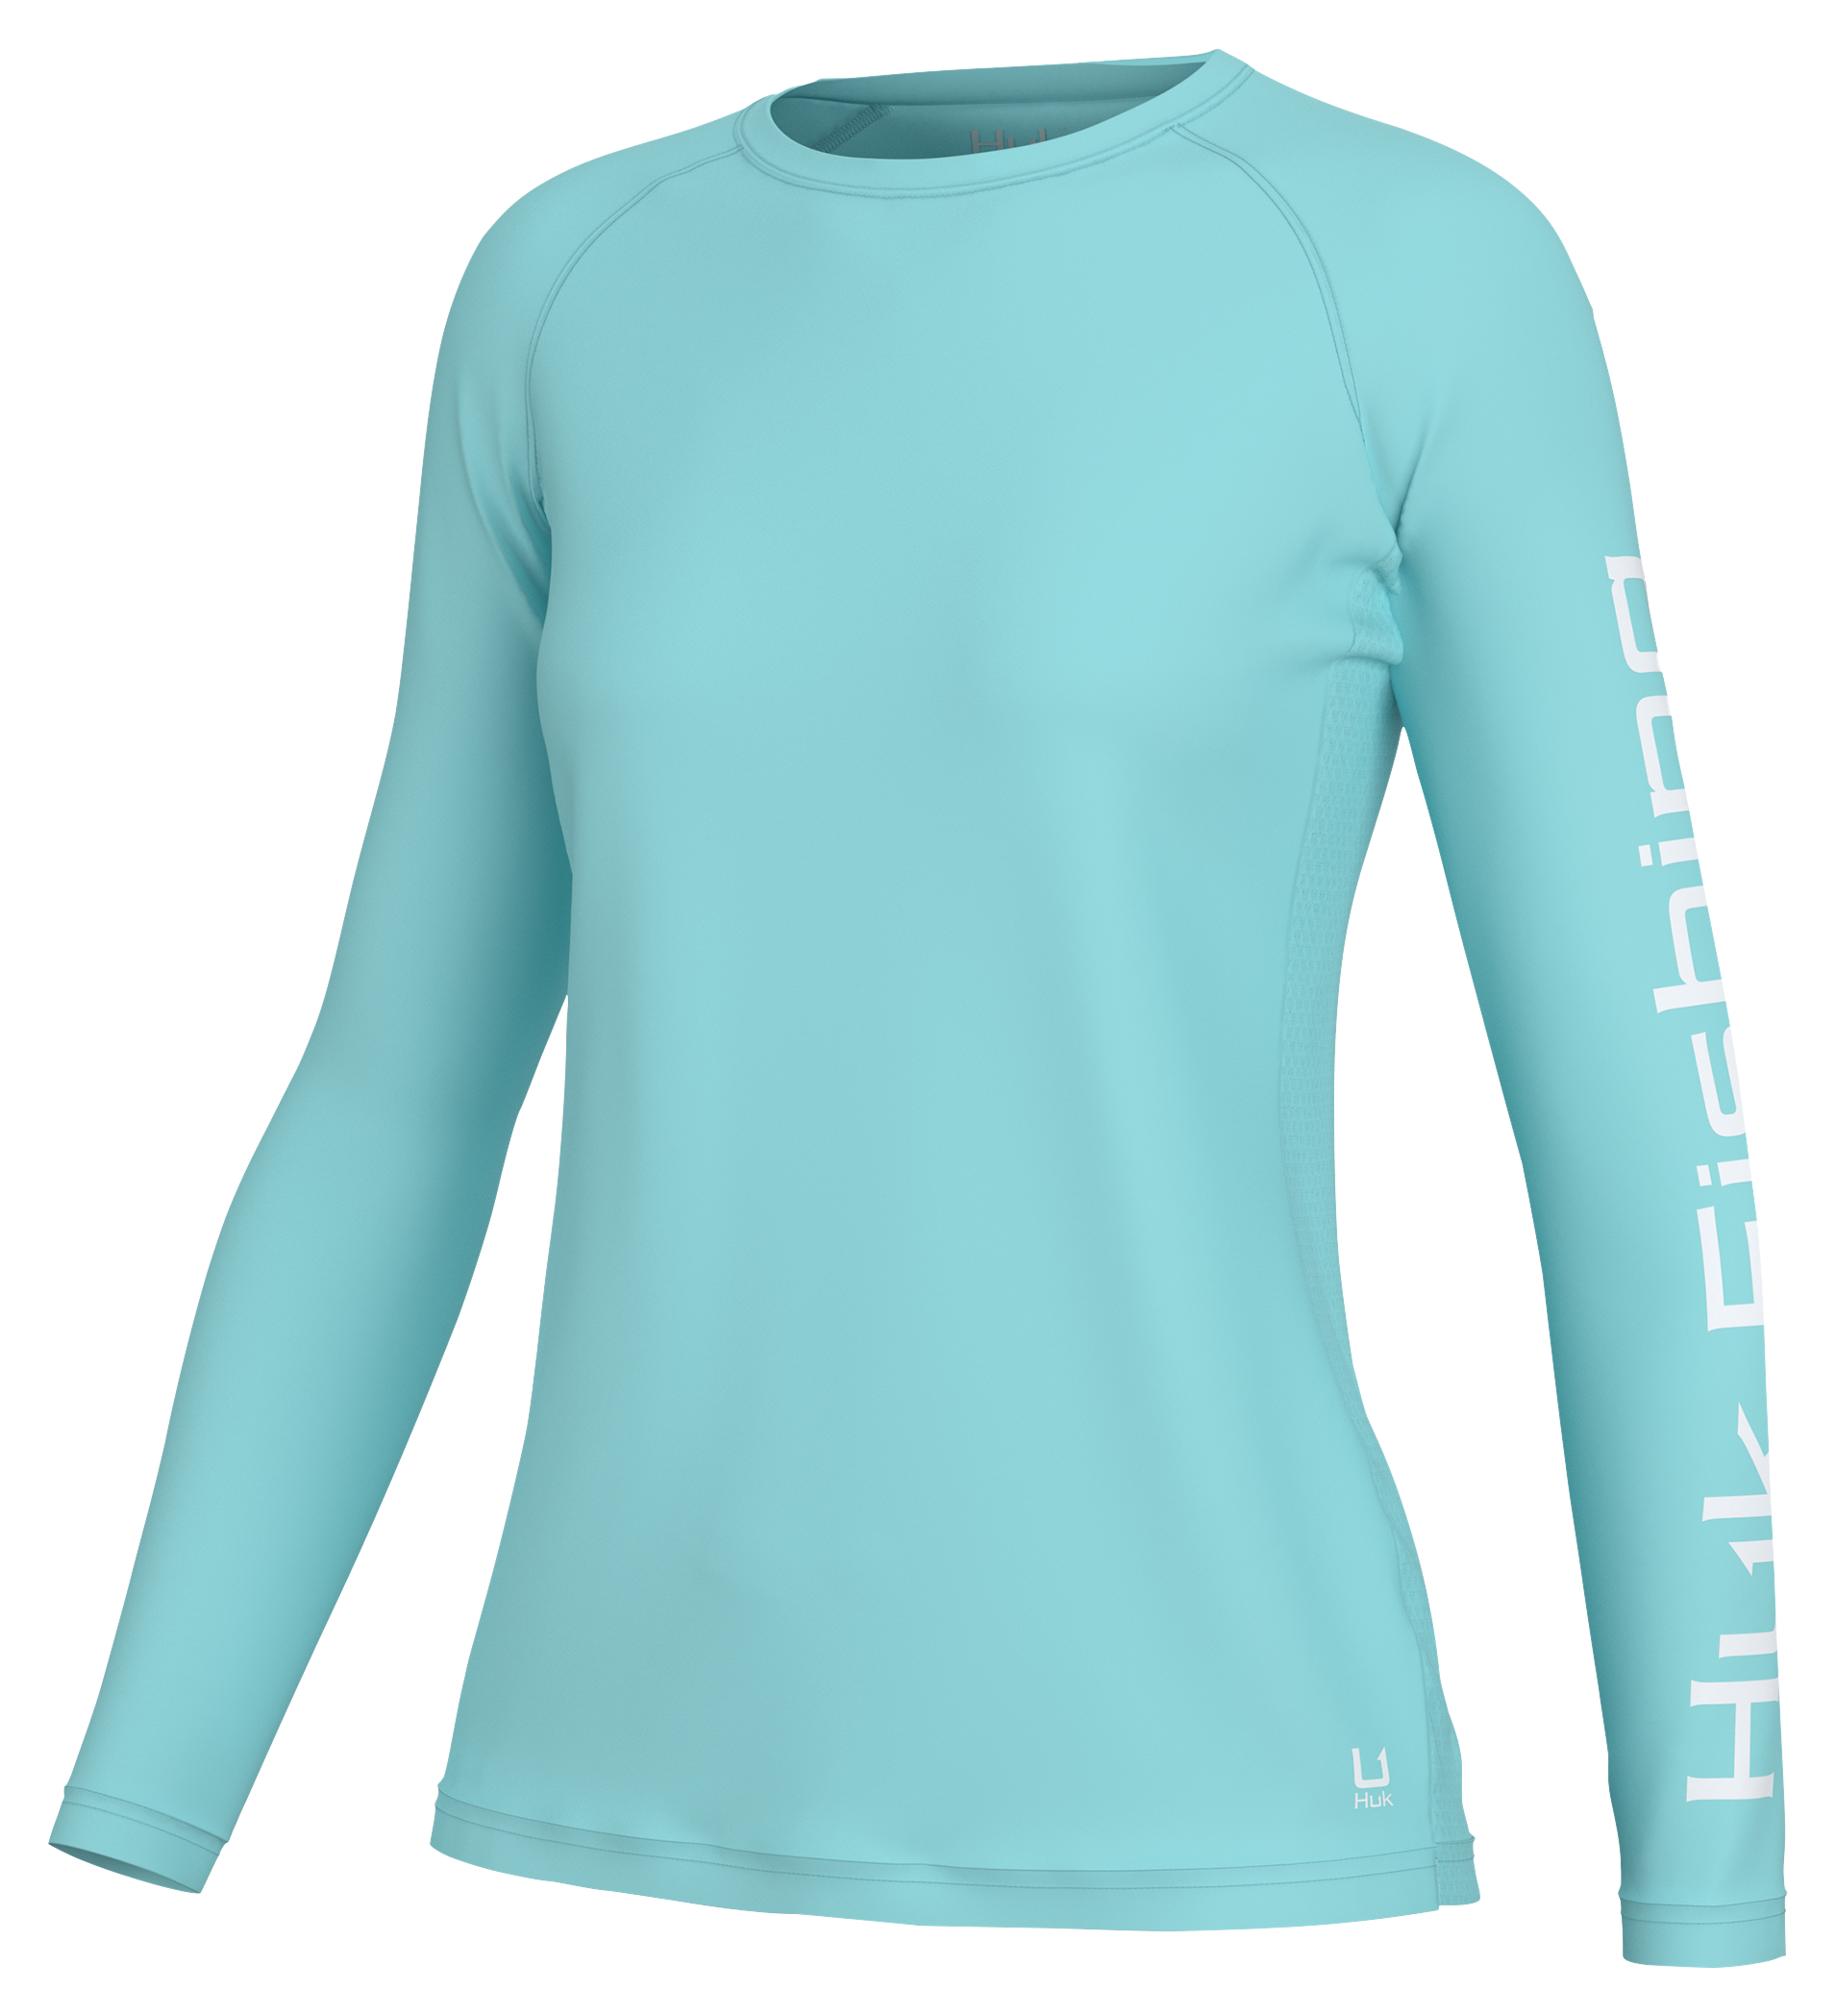 Huk Pursuit Huk and Bars Long-Sleeve Shirt for Ladies